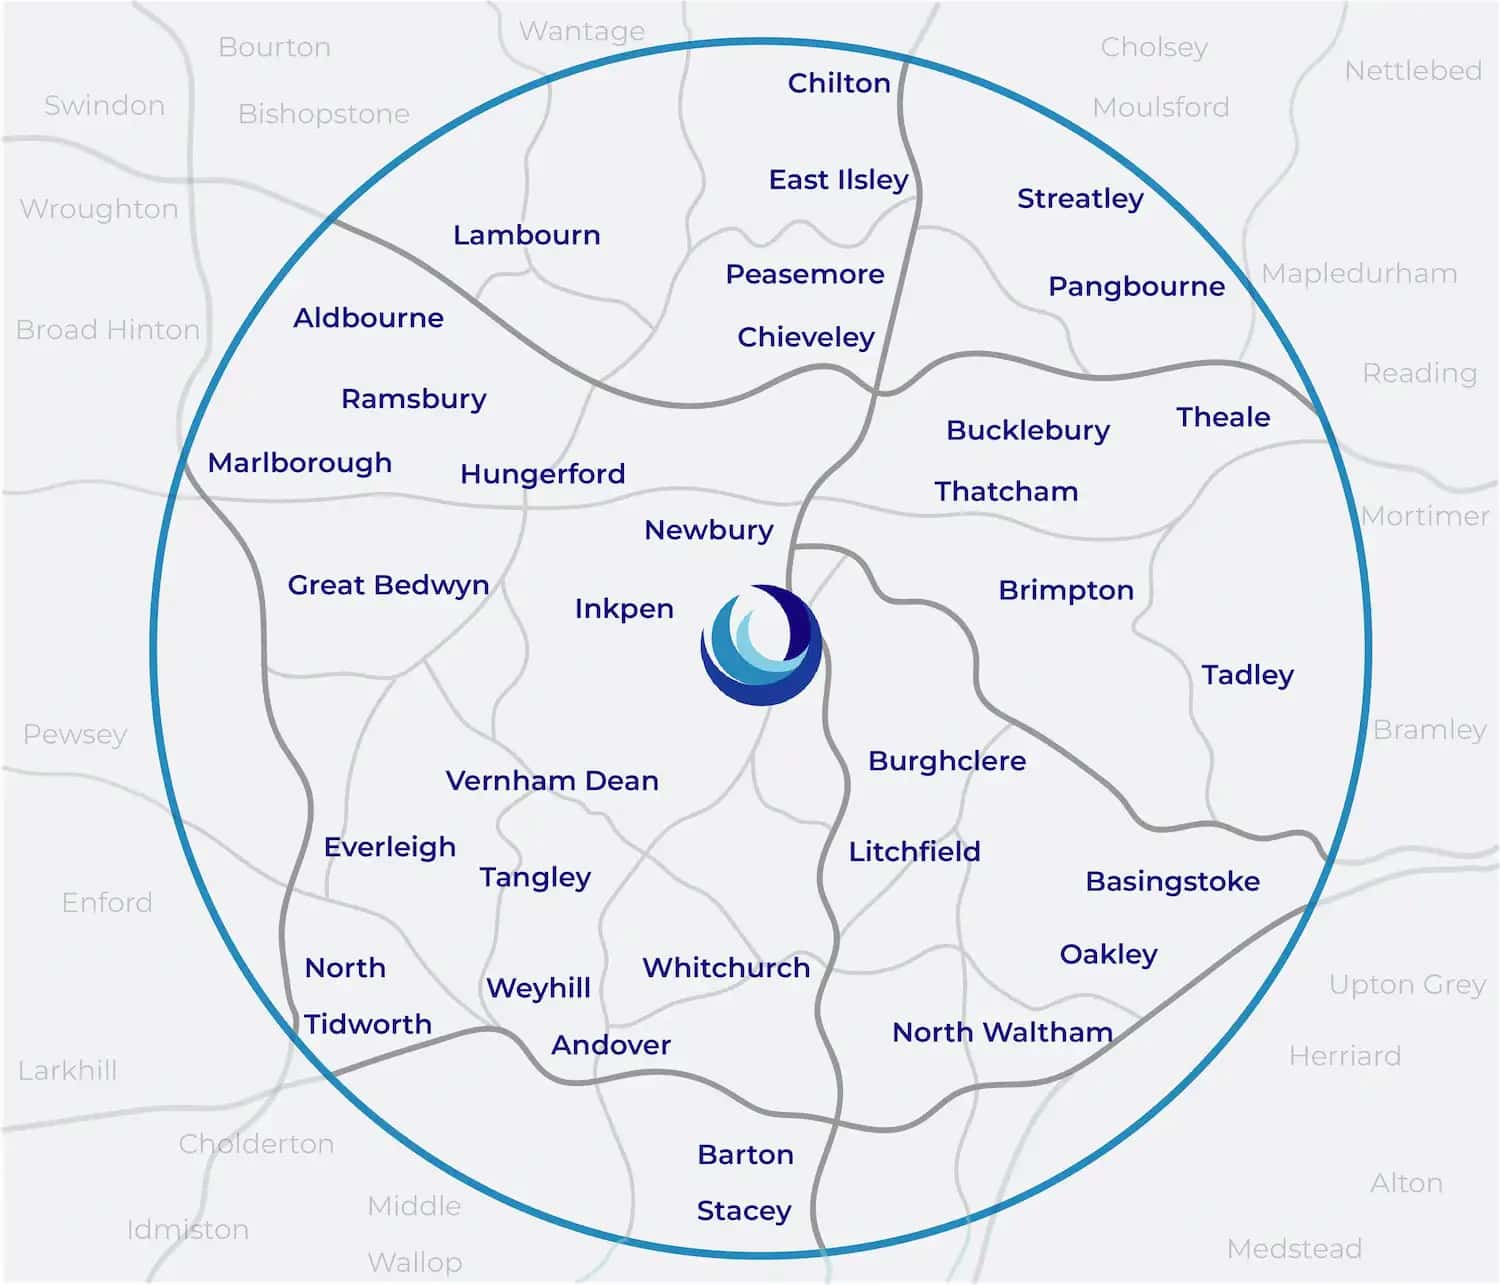 Areas we cover - Berkshire, Wiltshire, Oxfordshire and Hampshire